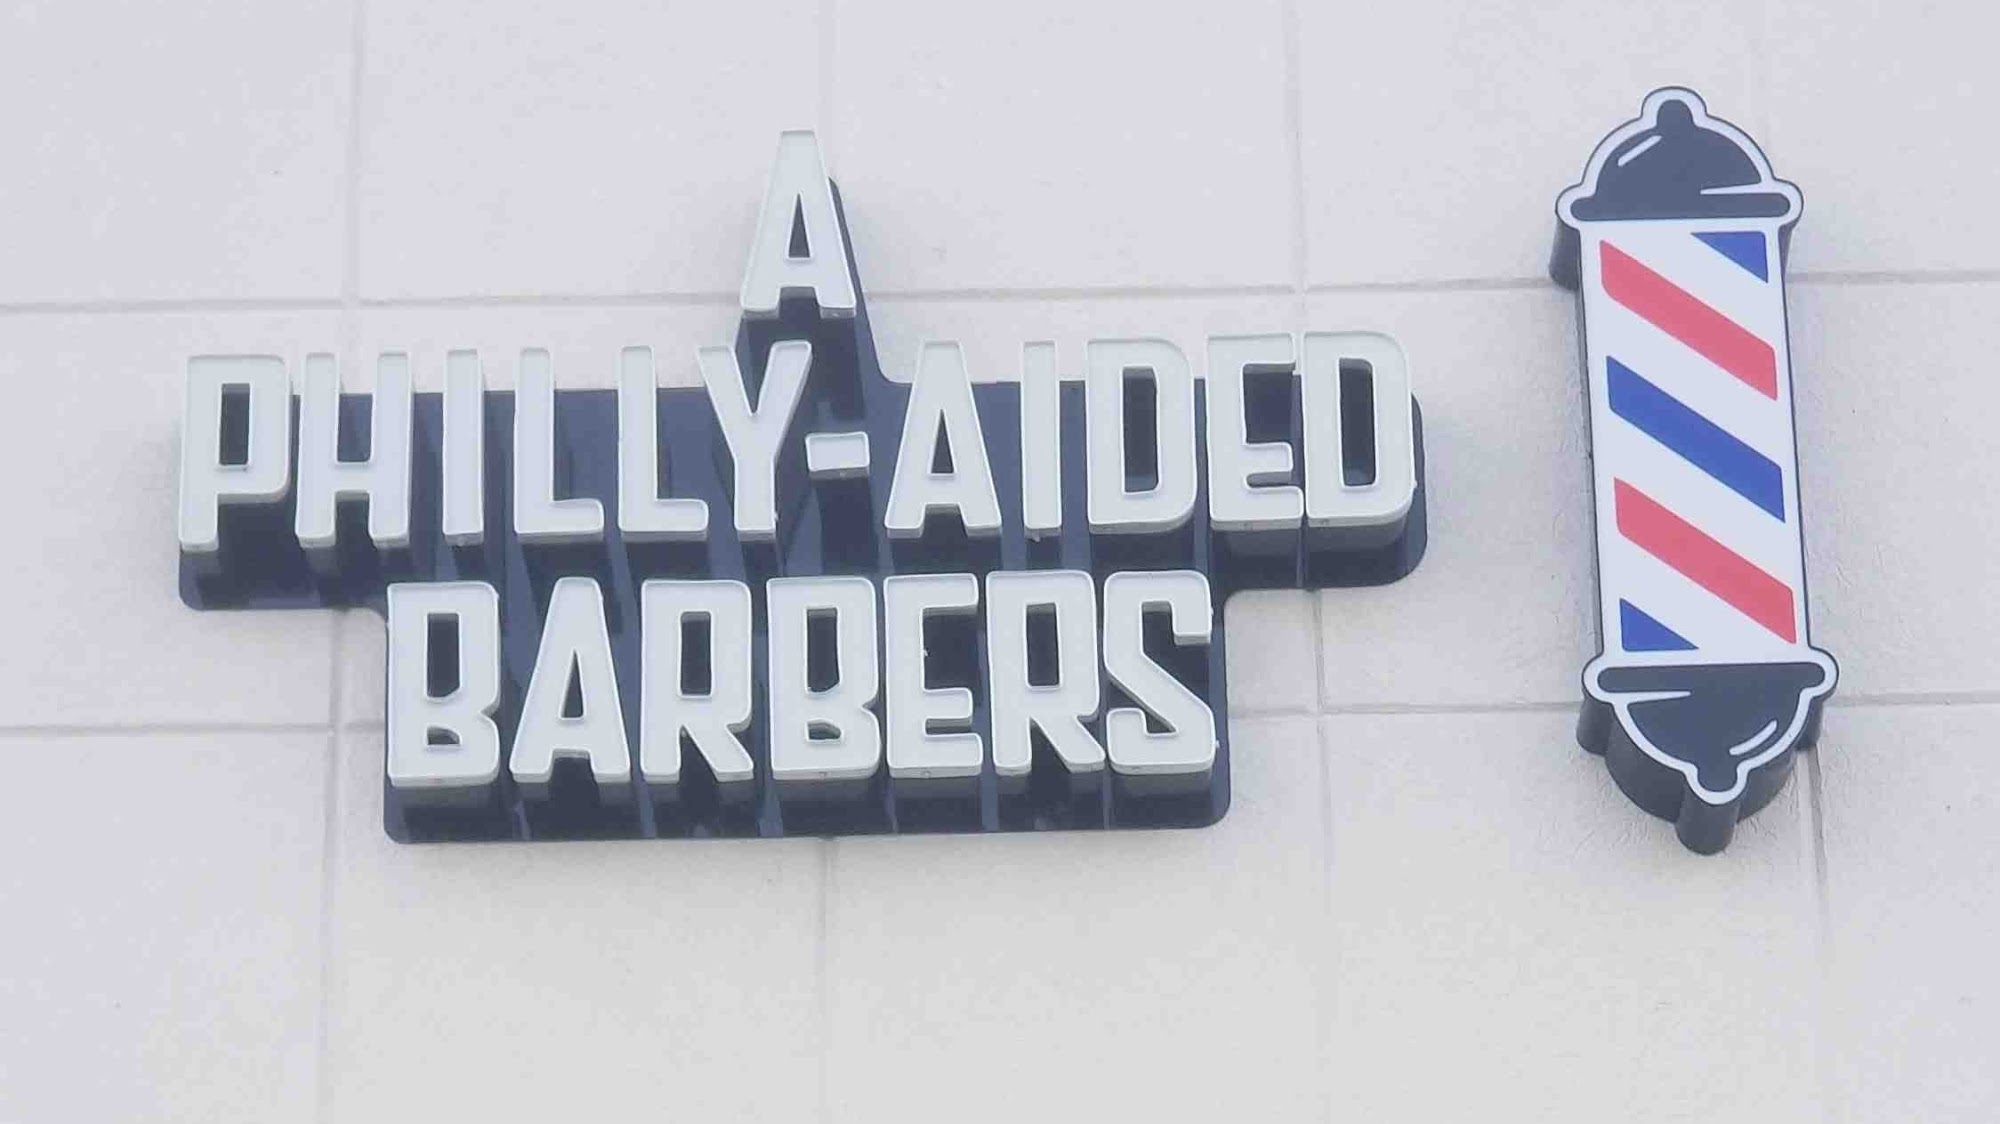 A Philly Aided Barbers